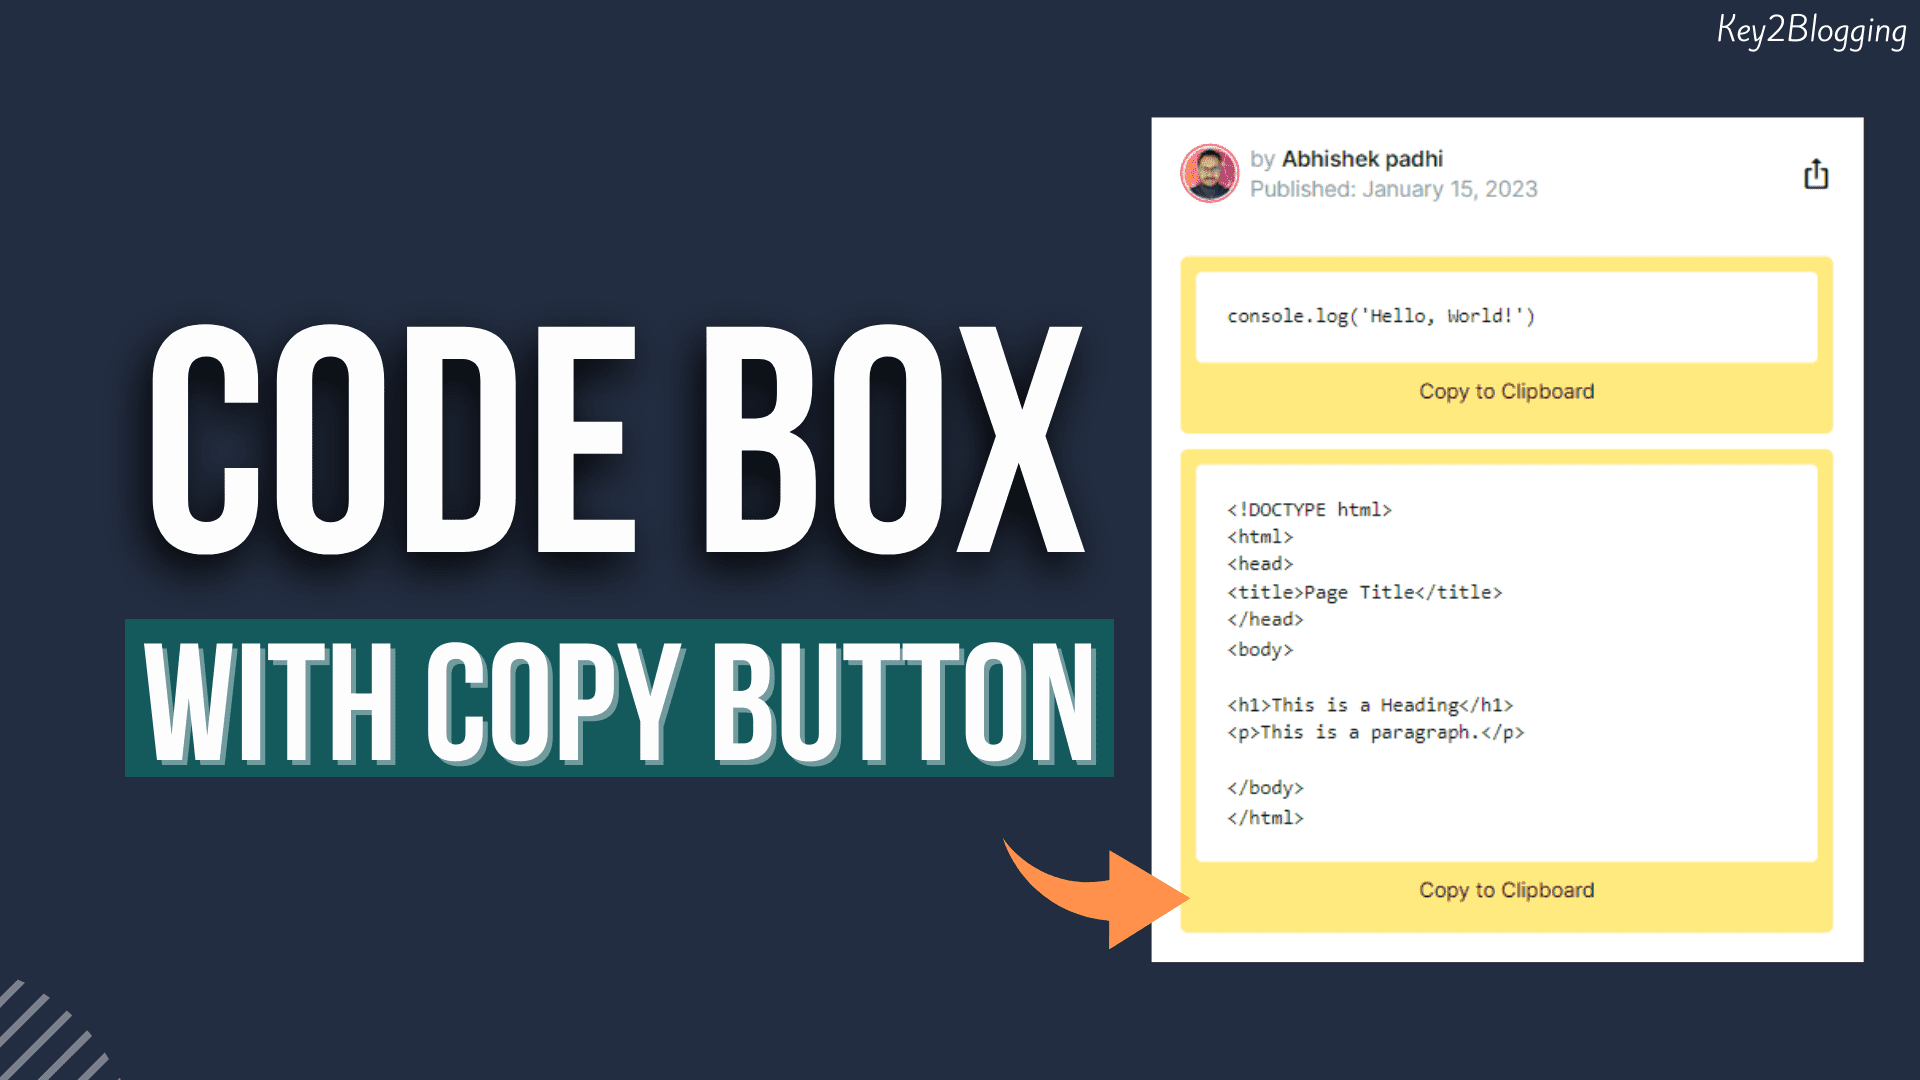 Code box with Copy to clipboard button